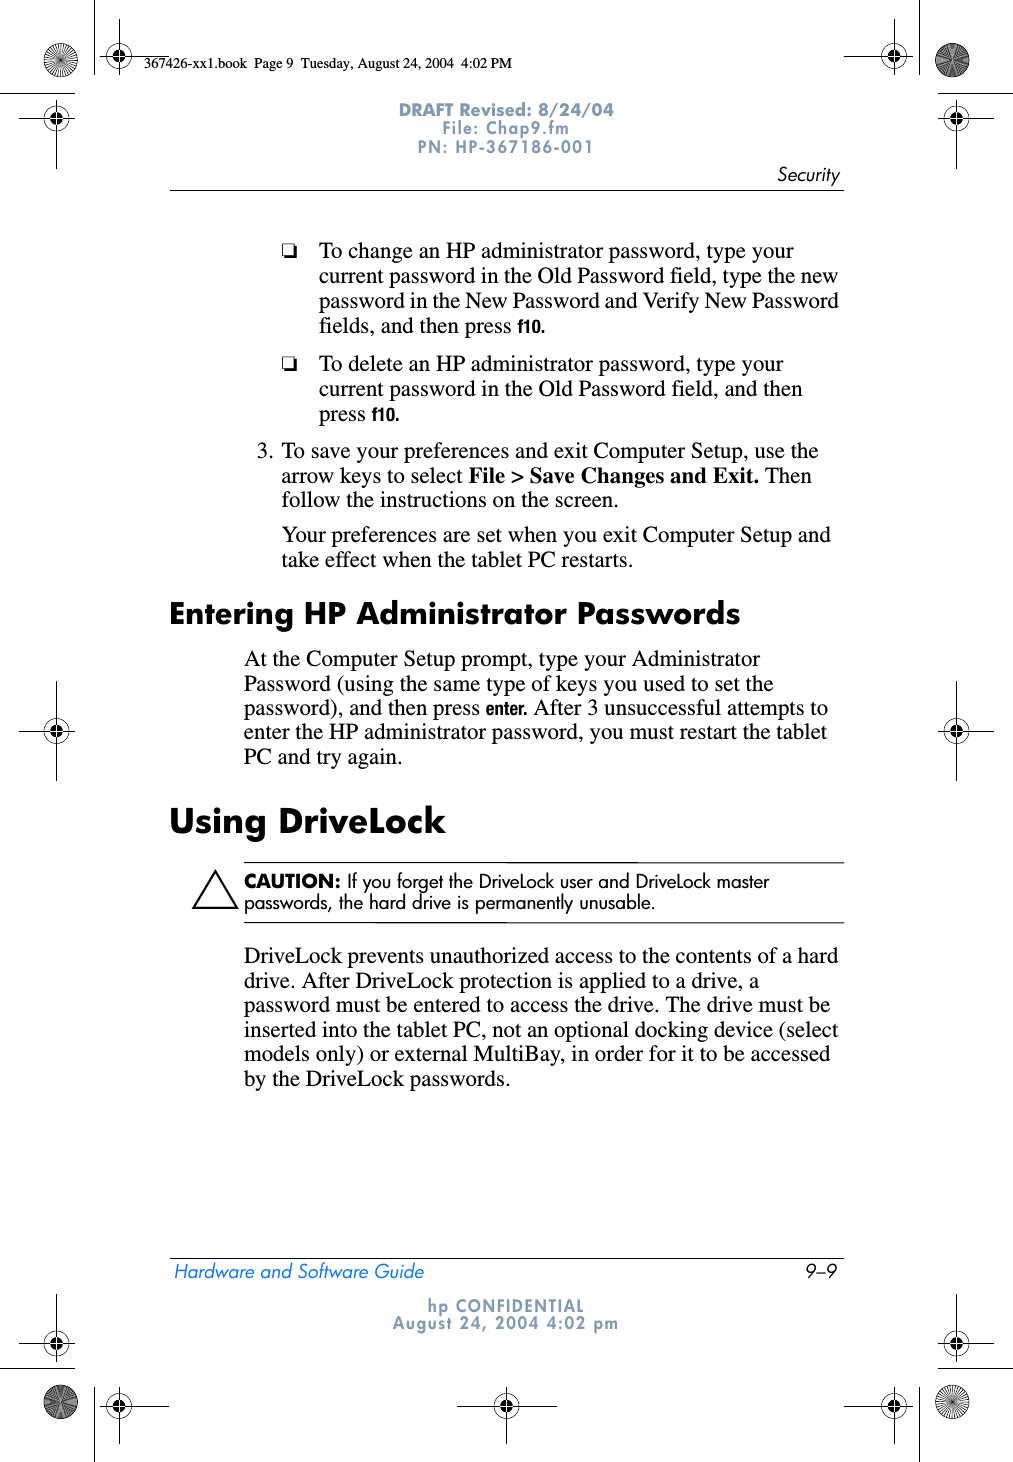 SecurityHardware and Software Guide 9–9DRAFT Revised: 8/24/04File: Chap9.fm PN: HP-367186-001 hp CONFIDENTIALAugust 24, 2004 4:02 pm❏To change an HP administrator password, type your current password in the Old Password field, type the new password in the New Password and Verify New Password fields, and then press f10.❏To delete an HP administrator password, type your current password in the Old Password field, and then press f10.3. To save your preferences and exit Computer Setup, use the arrow keys to select File &gt; Save Changes and Exit. Then follow the instructions on the screen.Your preferences are set when you exit Computer Setup and take effect when the tablet PC restarts.Entering HP Administrator PasswordsAt the Computer Setup prompt, type your Administrator Password (using the same type of keys you used to set the password), and then press enter. After 3 unsuccessful attempts to enter the HP administrator password, you must restart the tablet PC and try again.Using DriveLockÄCAUTION: If you forget the DriveLock user and DriveLock master passwords, the hard drive is permanently unusable.DriveLock prevents unauthorized access to the contents of a hard drive. After DriveLock protection is applied to a drive, a password must be entered to access the drive. The drive must be inserted into the tablet PC, not an optional docking device (select models only) or external MultiBay, in order for it to be accessed by the DriveLock passwords.367426-xx1.book  Page 9  Tuesday, August 24, 2004  4:02 PM